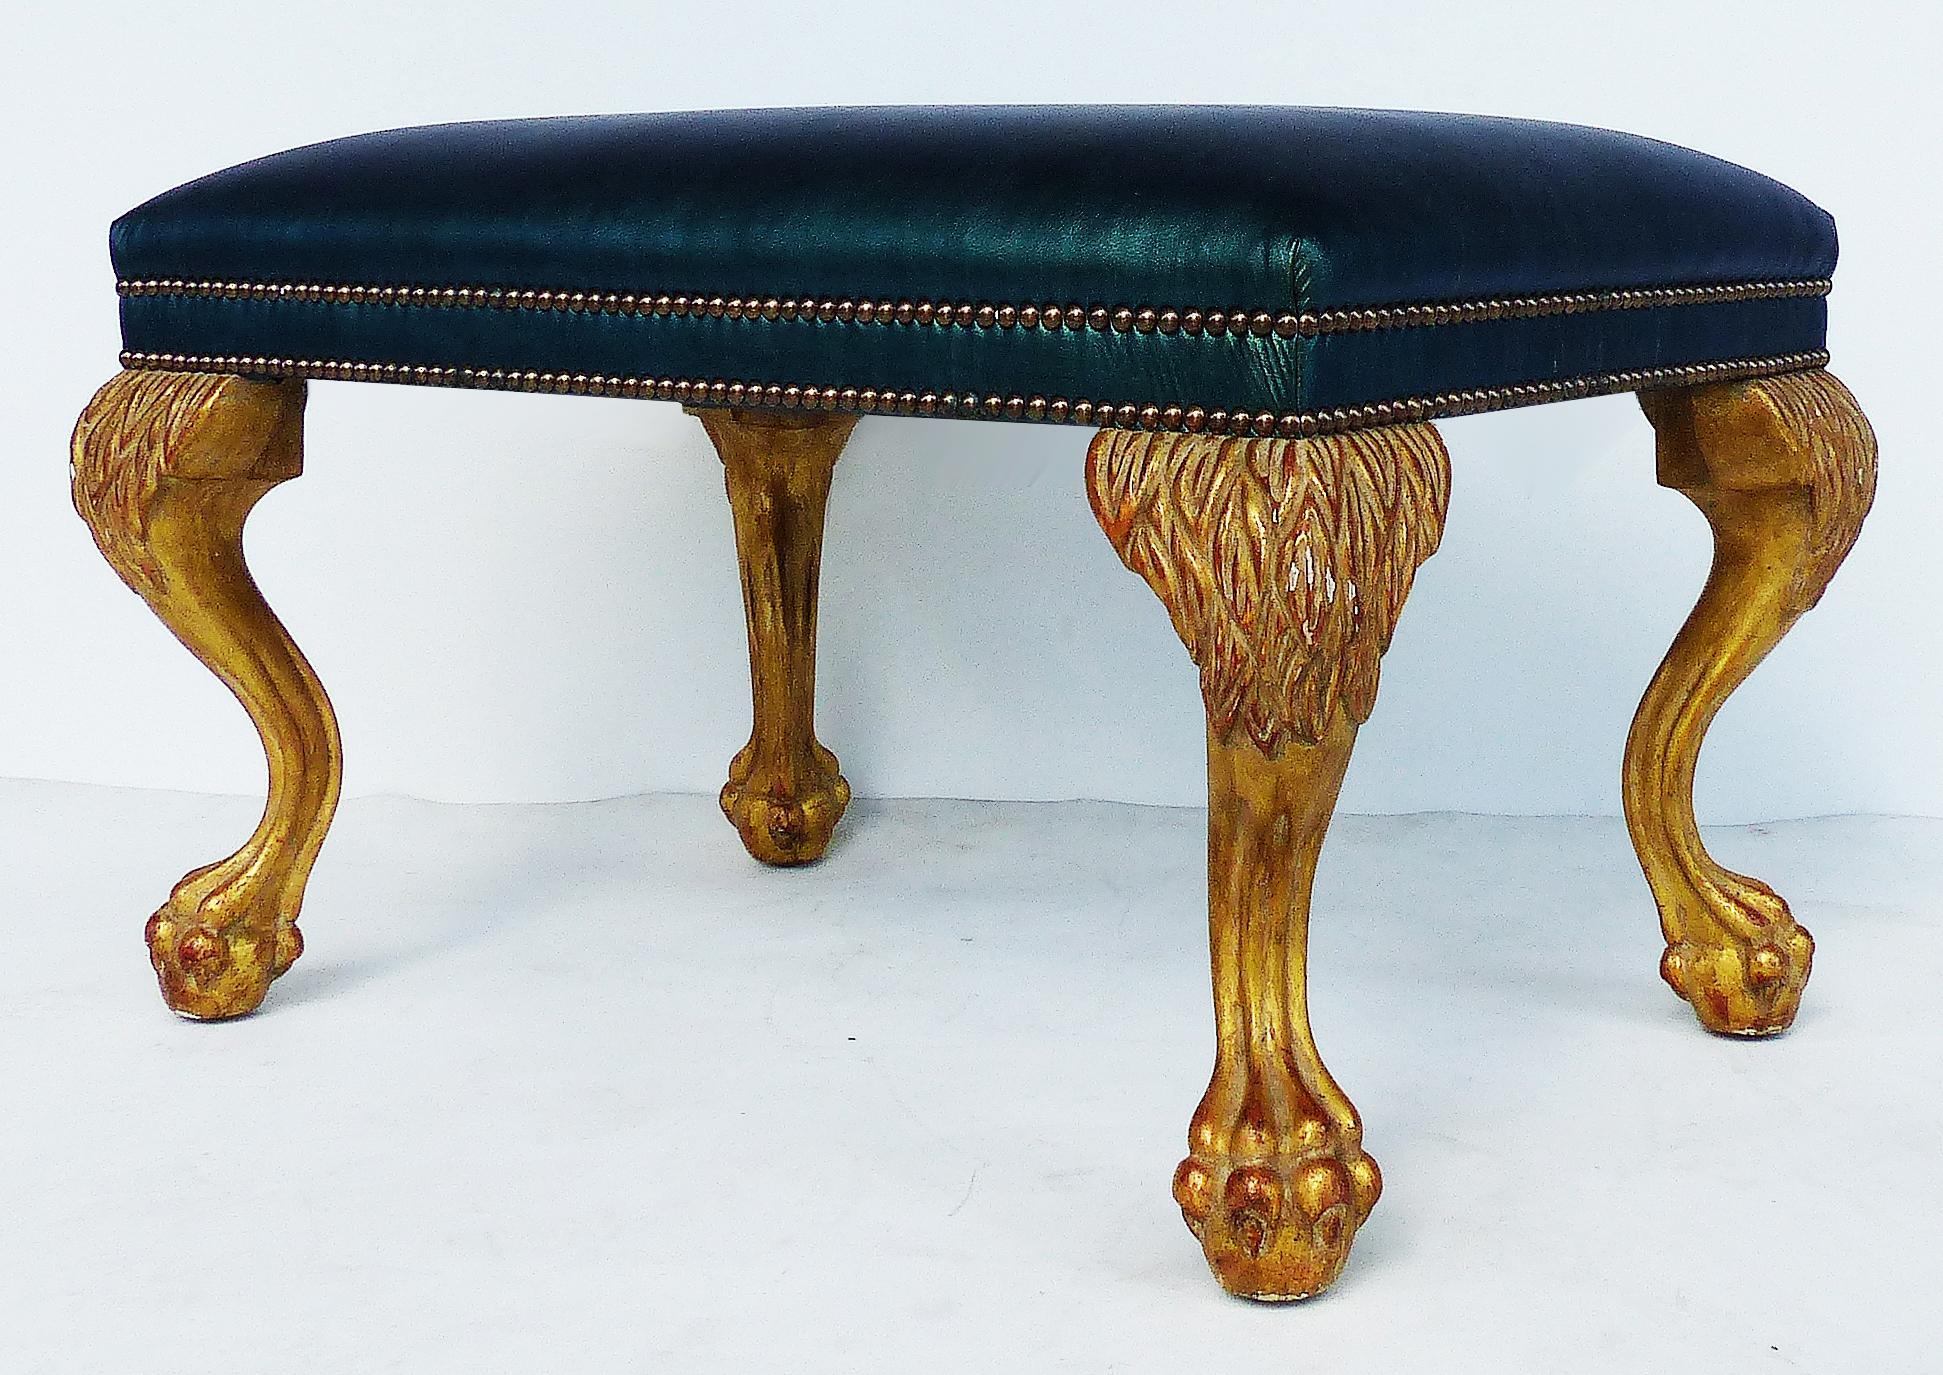 Jerry pair of Dennis & Leen lion paw benches/ottomans by Formations in leather

Offered for sale is a pair of elegant George I Jerry pair lion paw ottomans or benches by Formations for Dennis & Leen with leather upholstered seats with brass